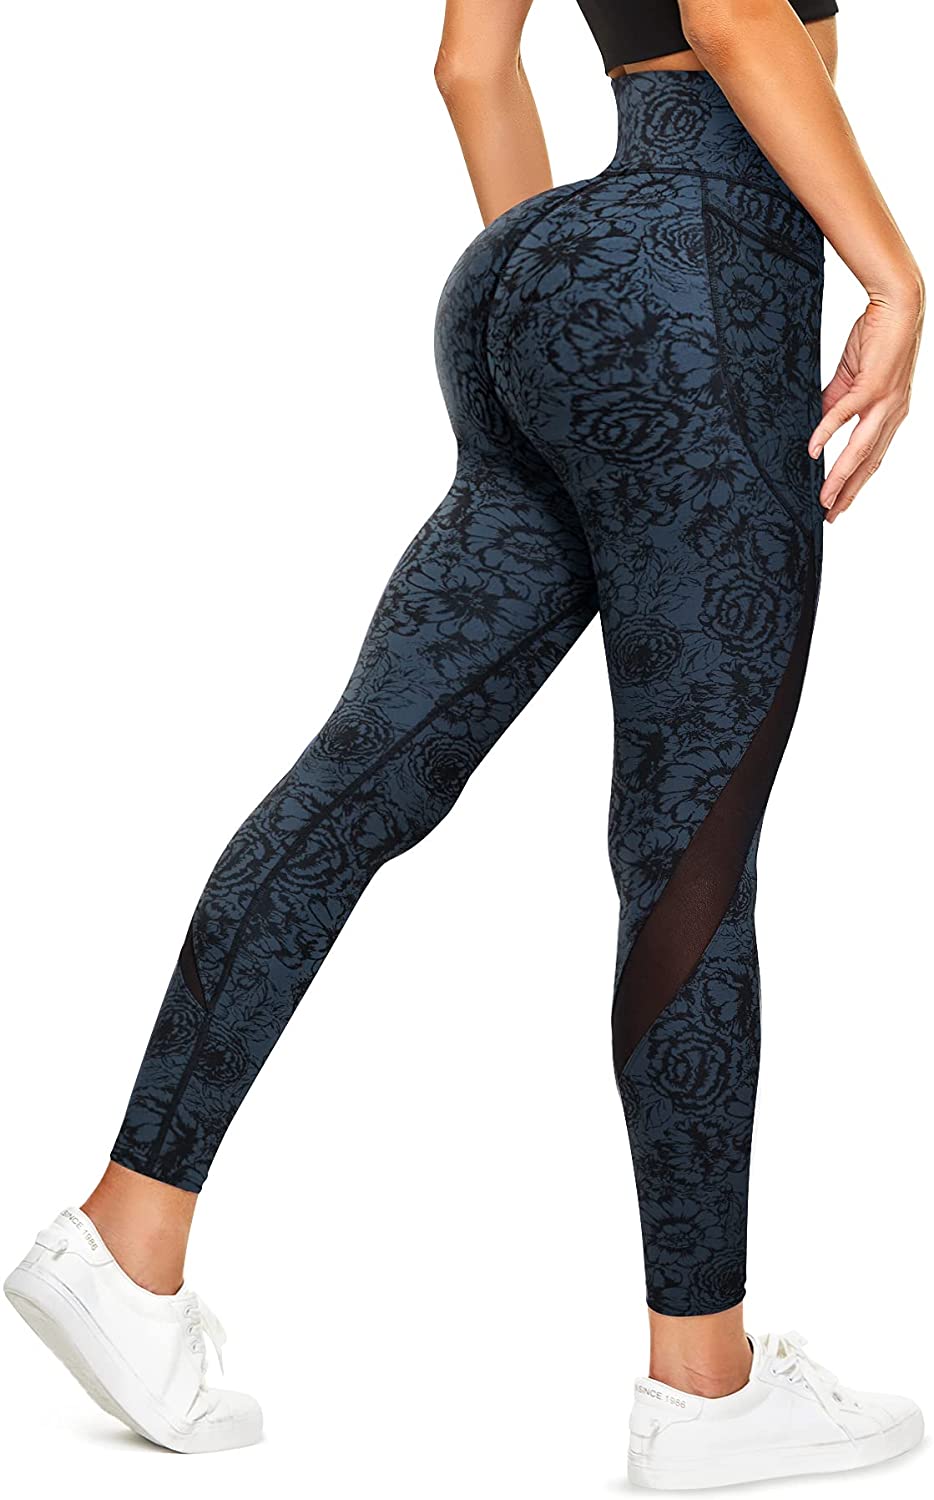 Buy TrainingGirl Mesh Leggings for Women High Waisted Yoga Pants Workout  Running Printed Leggings Gym Sports Tights with Pockets (Black, Medium) at